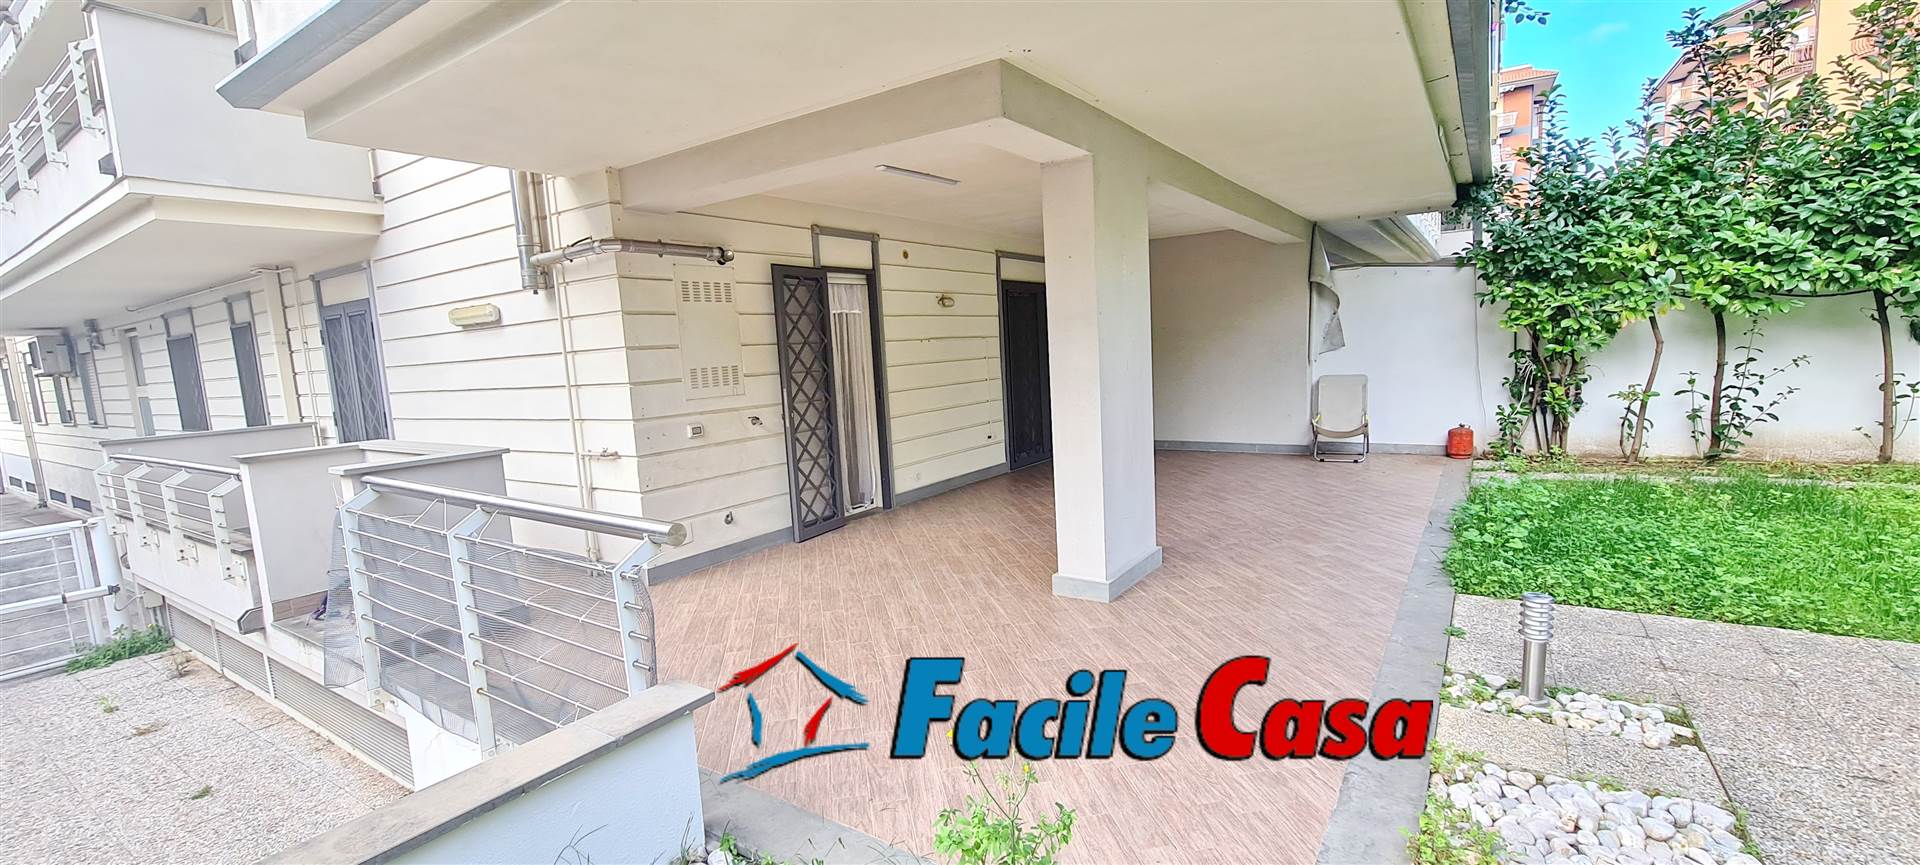 FORMIA, Apartment for rent of 94 Sq. mt., Excellent Condition, Heating Individual heating system, Energetic class: G, placed at Ground, composed by: 